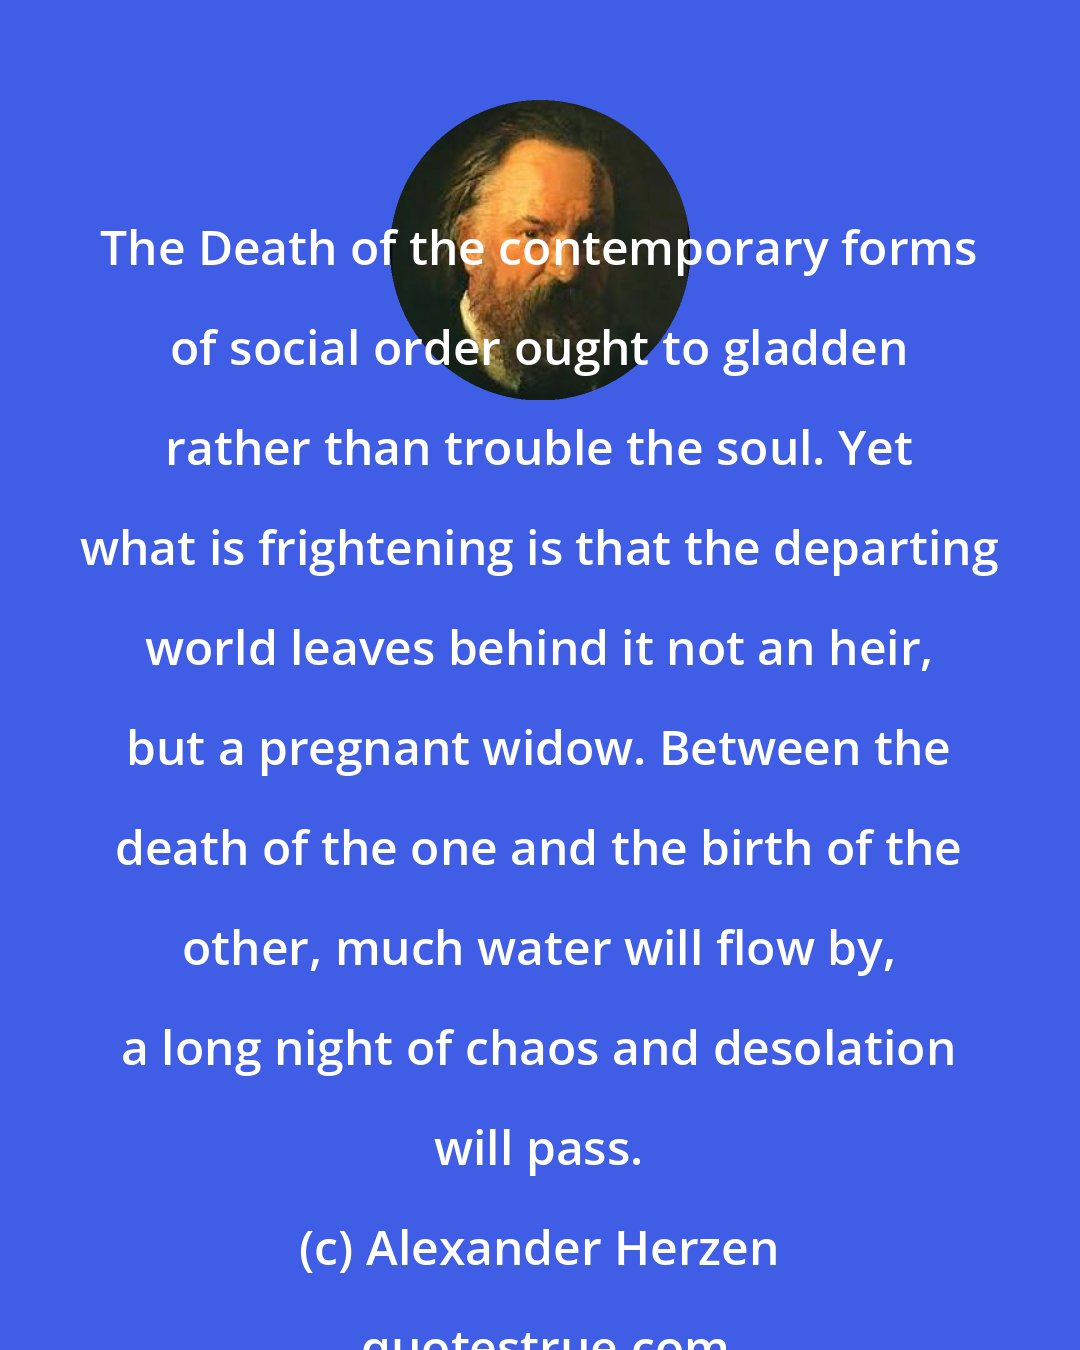 Alexander Herzen: The Death of the contemporary forms of social order ought to gladden rather than trouble the soul. Yet what is frightening is that the departing world leaves behind it not an heir, but a pregnant widow. Between the death of the one and the birth of the other, much water will flow by, a long night of chaos and desolation will pass.